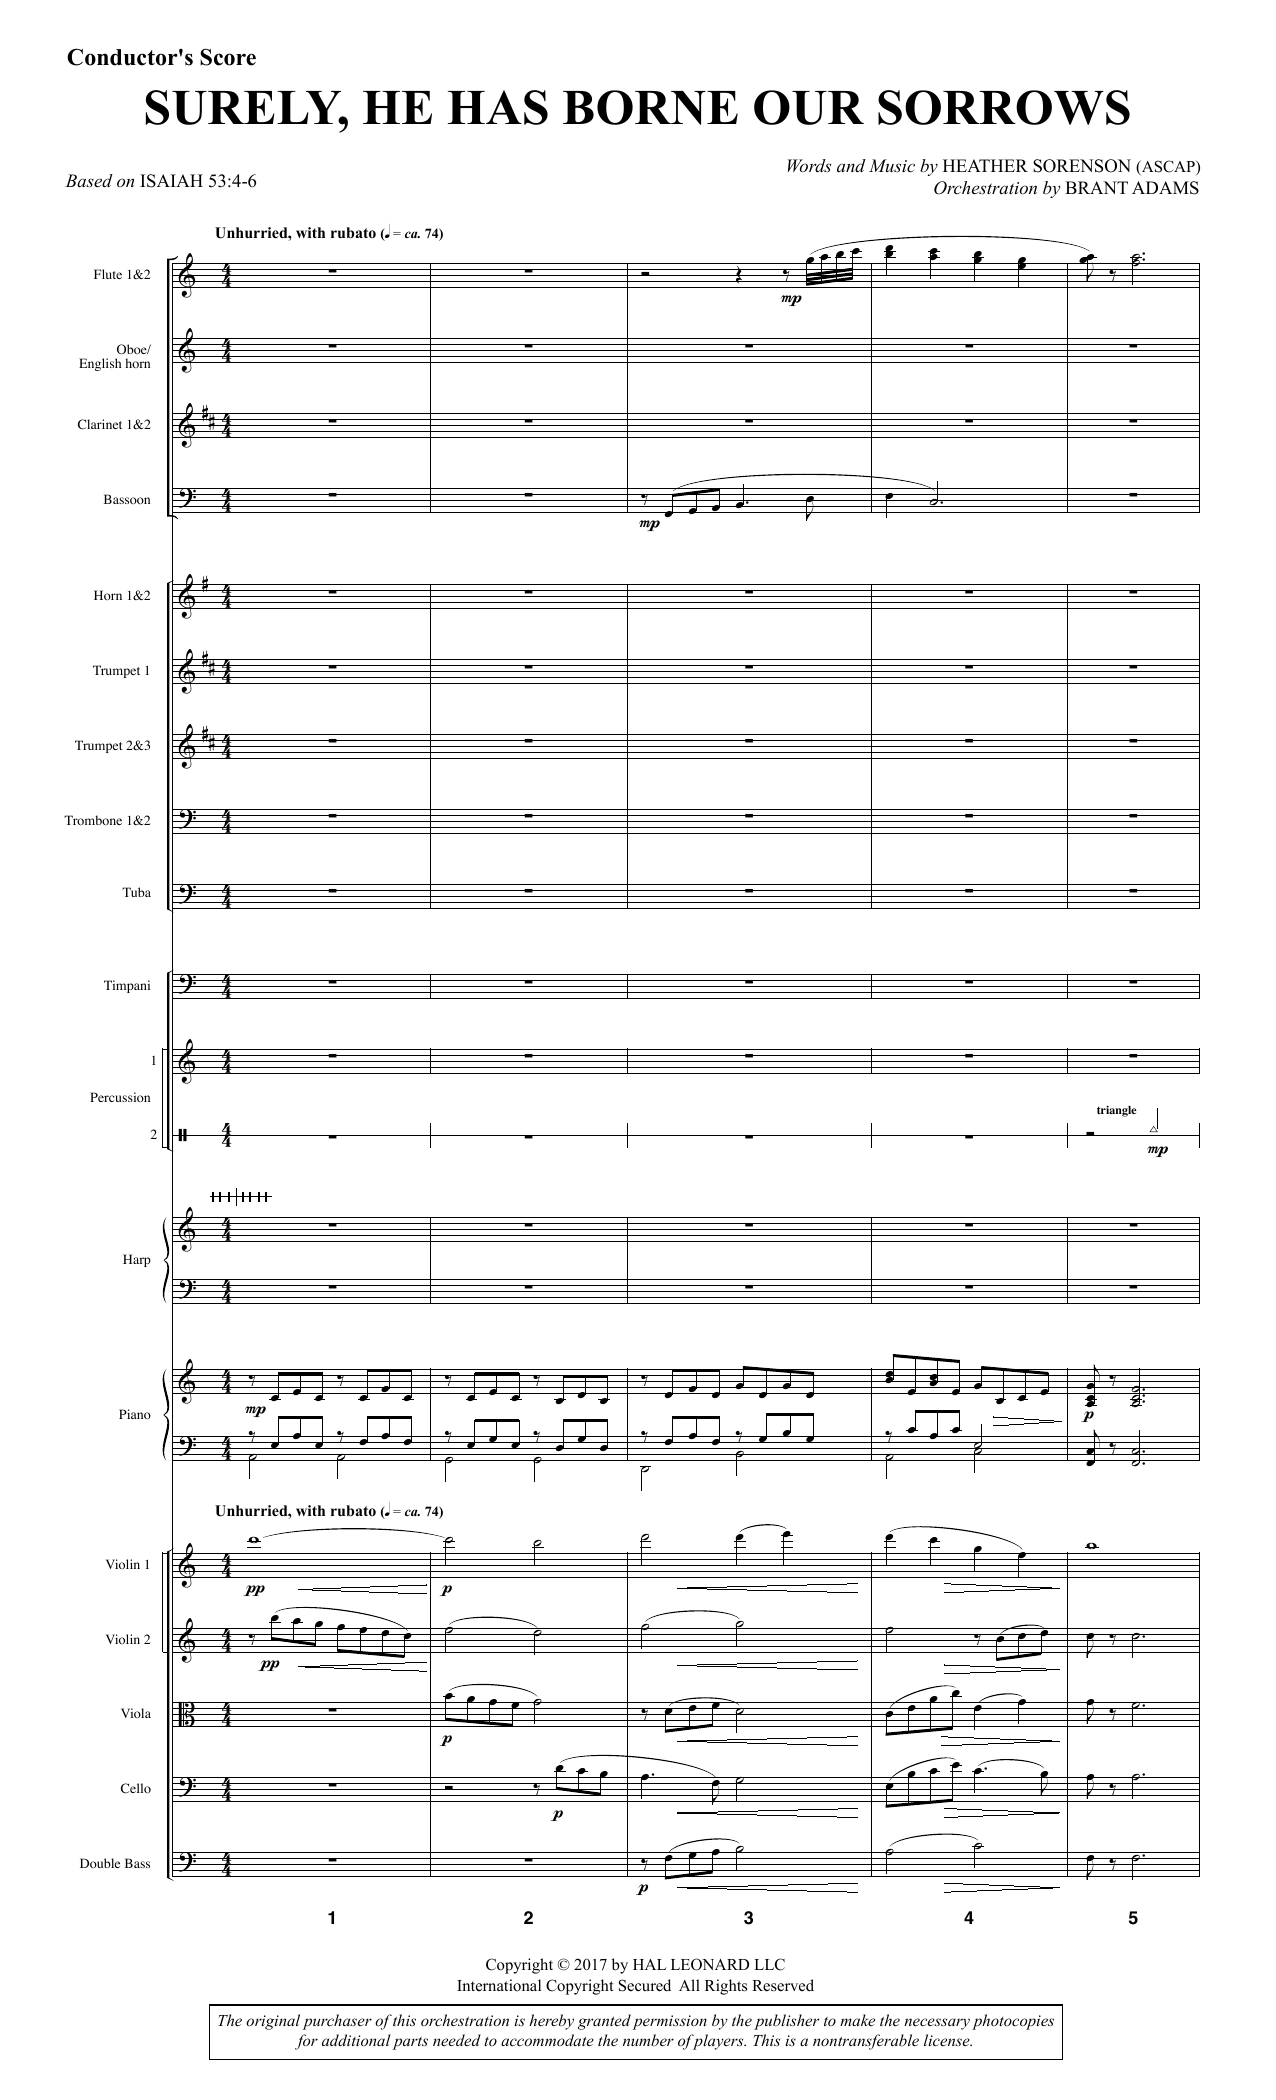 Download Heather Sorenson Surely, He Has Borne Our Sorrows - Full Sheet Music